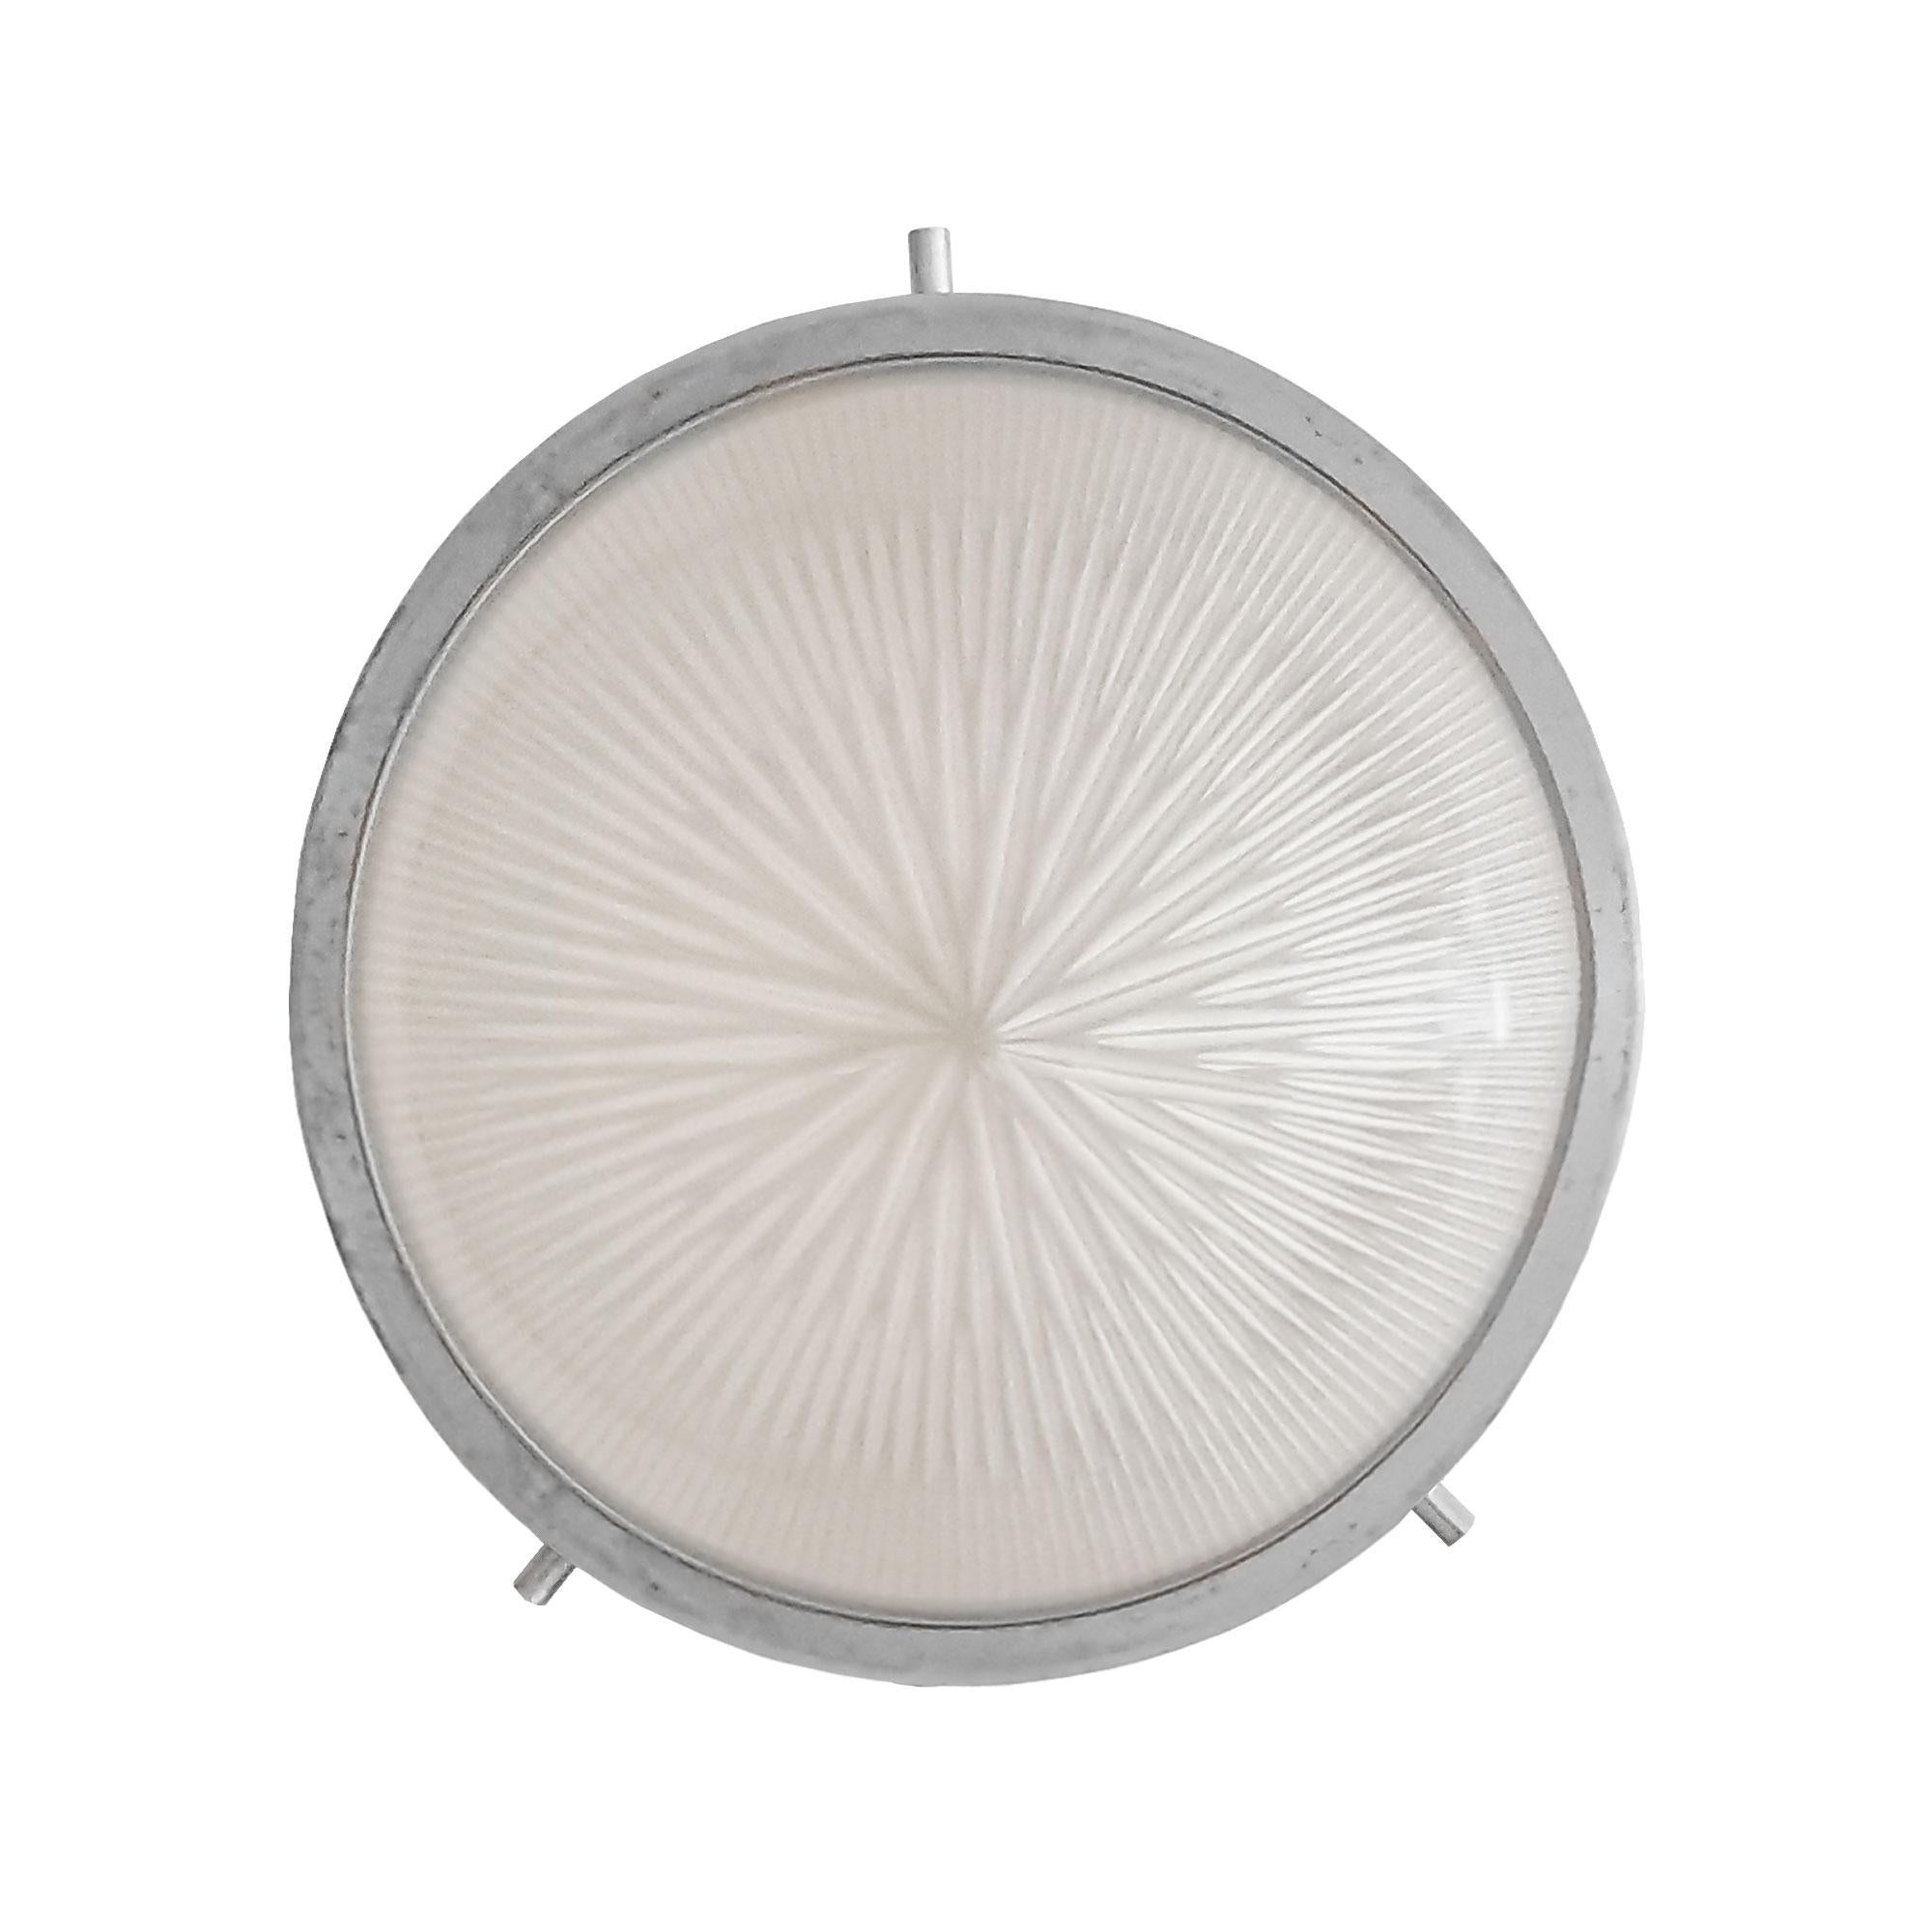 Pair of small ceiling or wall light 